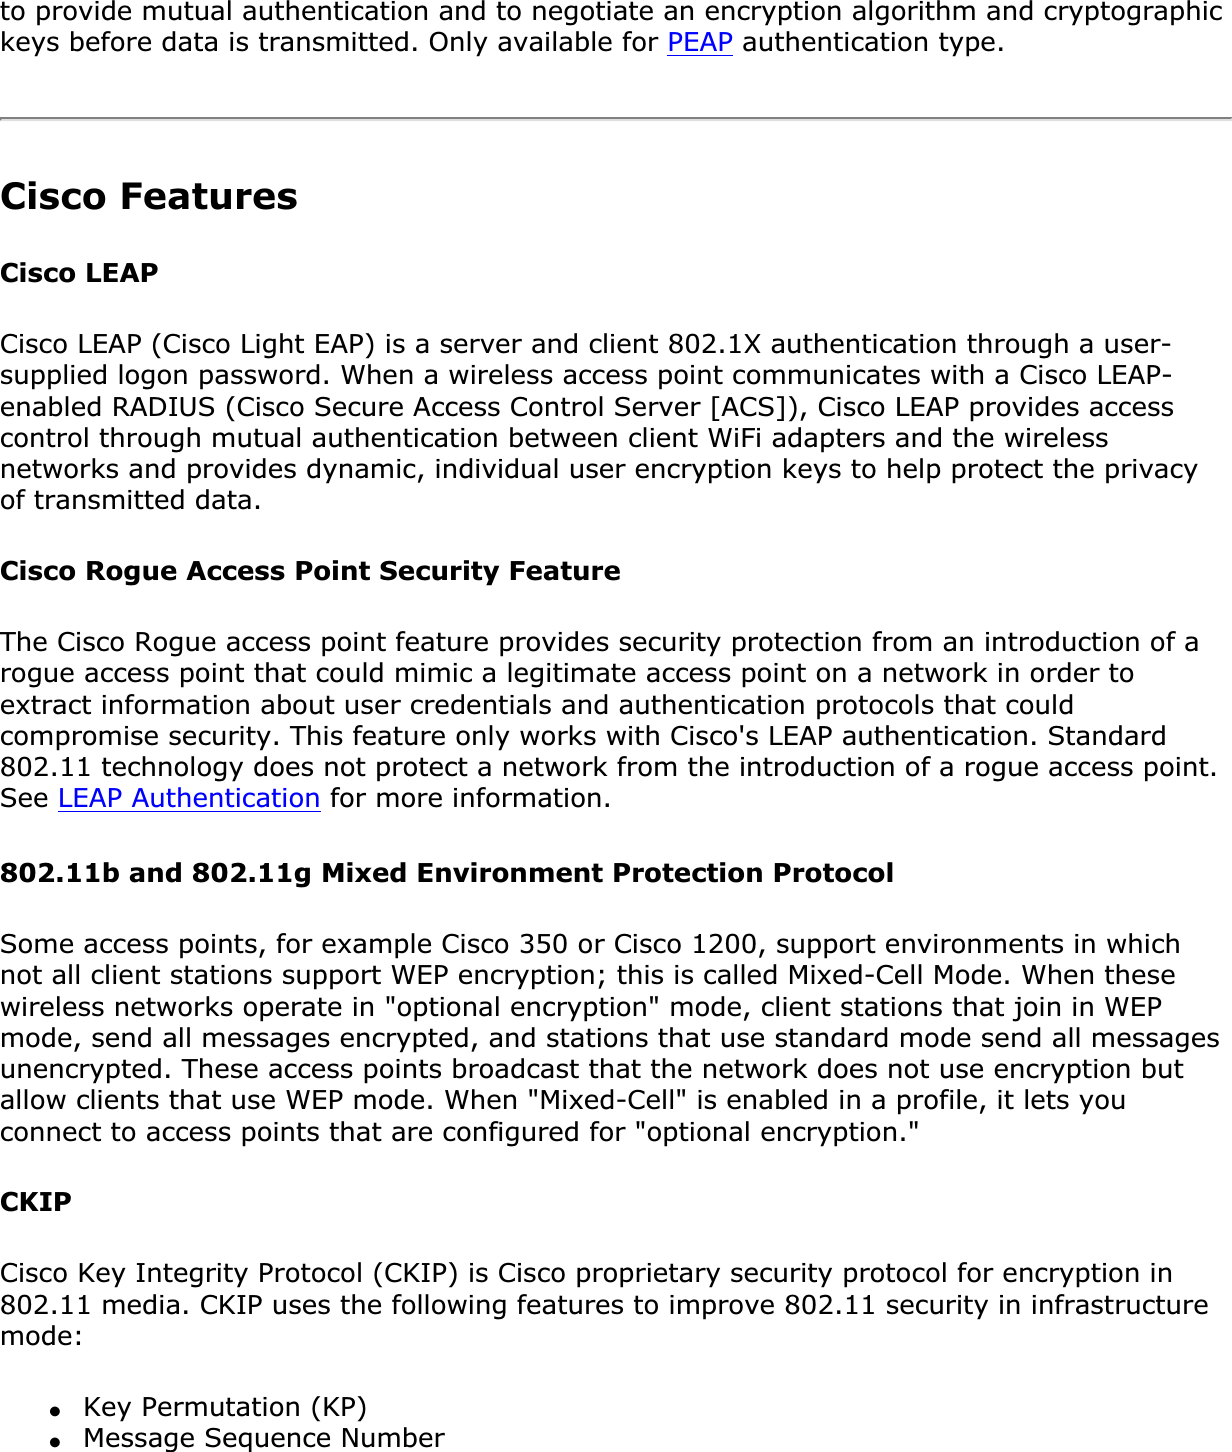 to provide mutual authentication and to negotiate an encryption algorithm and cryptographic keys before data is transmitted. Only available for PEAP authentication type.Cisco FeaturesCisco LEAP Cisco LEAP (Cisco Light EAP) is a server and client 802.1X authentication through a user-supplied logon password. When a wireless access point communicates with a Cisco LEAP-enabled RADIUS (Cisco Secure Access Control Server [ACS]), Cisco LEAP provides access control through mutual authentication between client WiFi adapters and the wireless networks and provides dynamic, individual user encryption keys to help protect the privacy of transmitted data.Cisco Rogue Access Point Security FeatureThe Cisco Rogue access point feature provides security protection from an introduction of a rogue access point that could mimic a legitimate access point on a network in order to extract information about user credentials and authentication protocols that could compromise security. This feature only works with Cisco&apos;s LEAP authentication. Standard 802.11 technology does not protect a network from the introduction of a rogue access point. See LEAP Authentication for more information.802.11b and 802.11g Mixed Environment Protection ProtocolSome access points, for example Cisco 350 or Cisco 1200, support environments in which not all client stations support WEP encryption; this is called Mixed-Cell Mode. When these wireless networks operate in &quot;optional encryption&quot; mode, client stations that join in WEP mode, send all messages encrypted, and stations that use standard mode send all messages unencrypted. These access points broadcast that the network does not use encryption but allow clients that use WEP mode. When &quot;Mixed-Cell&quot; is enabled in a profile, it lets you connect to access points that are configured for &quot;optional encryption.&quot;CKIPCisco Key Integrity Protocol (CKIP) is Cisco proprietary security protocol for encryption in 802.11 media. CKIP uses the following features to improve 802.11 security in infrastructure mode:●Key Permutation (KP)●Message Sequence Number